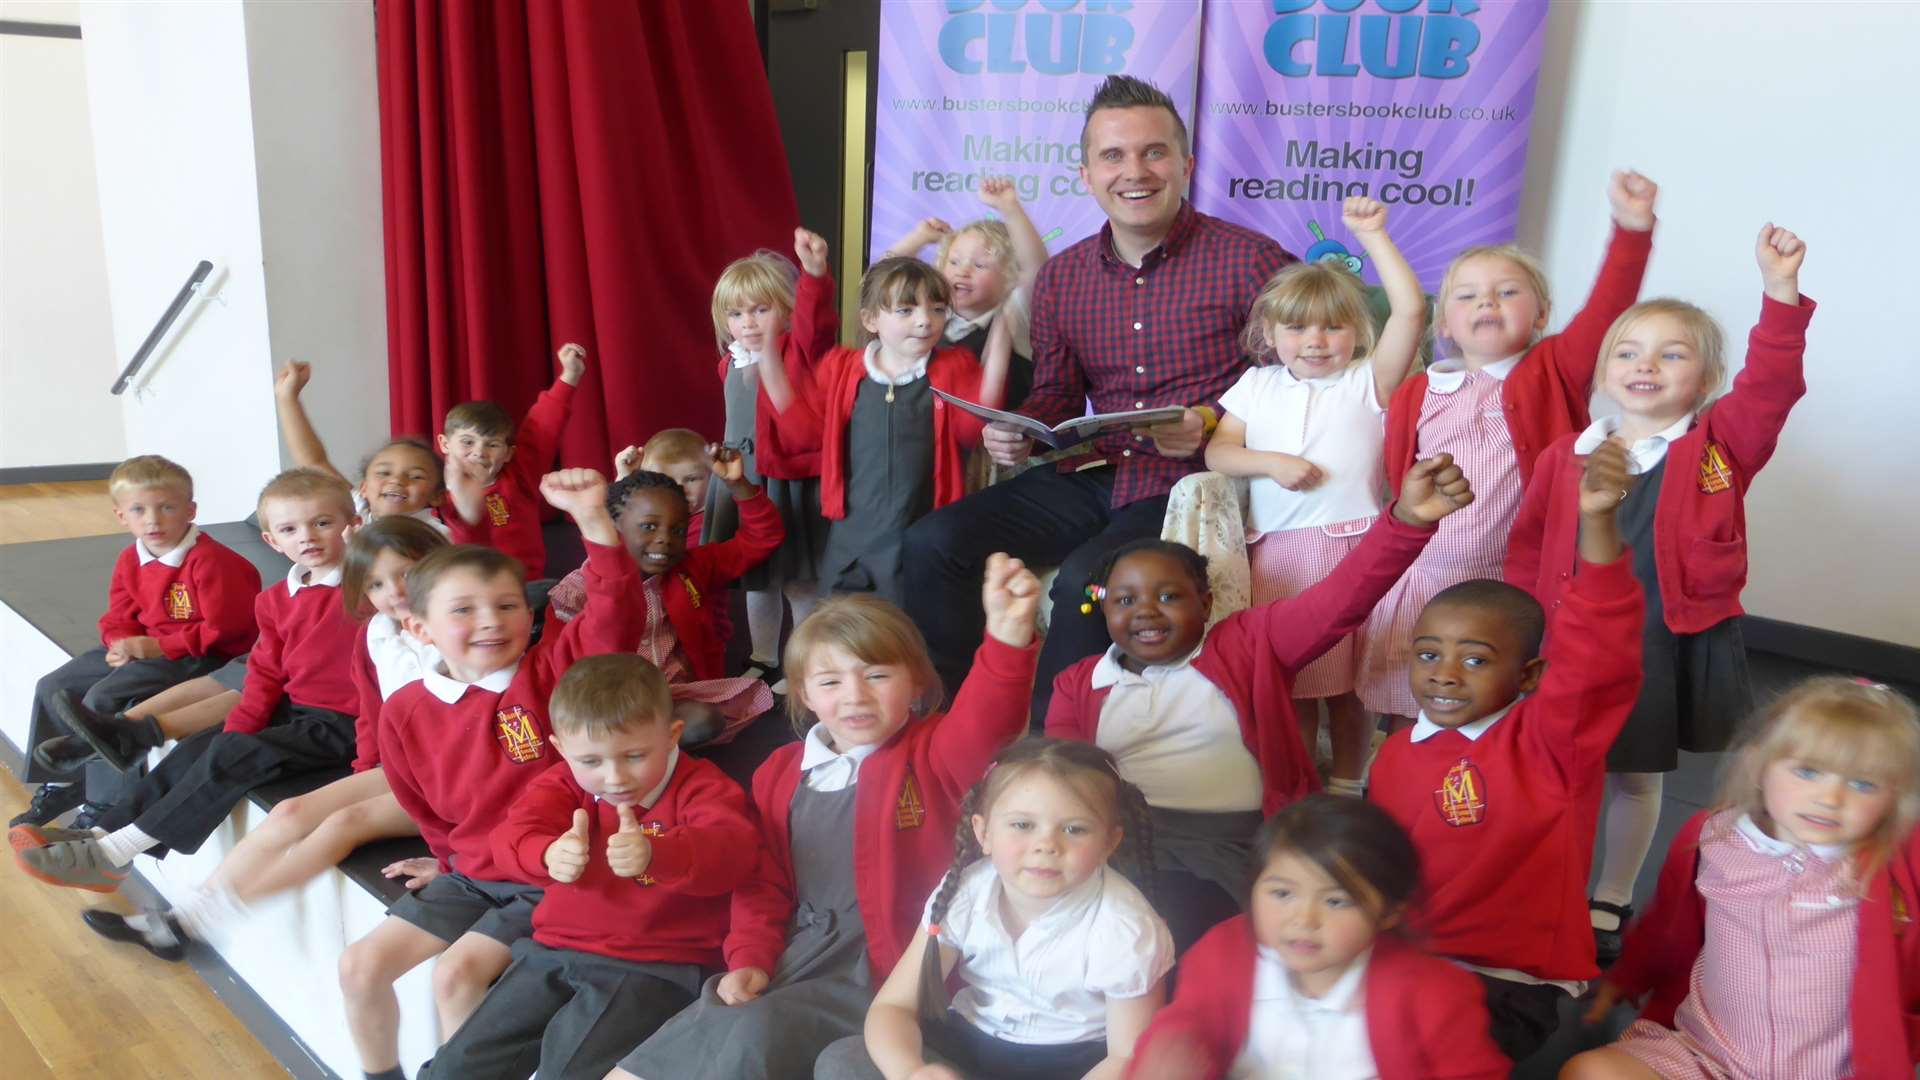 Sky Class won a reading contest and their prize was a storytelling visit from Phil Gallagher of CBeebies' Mister Maker fame.